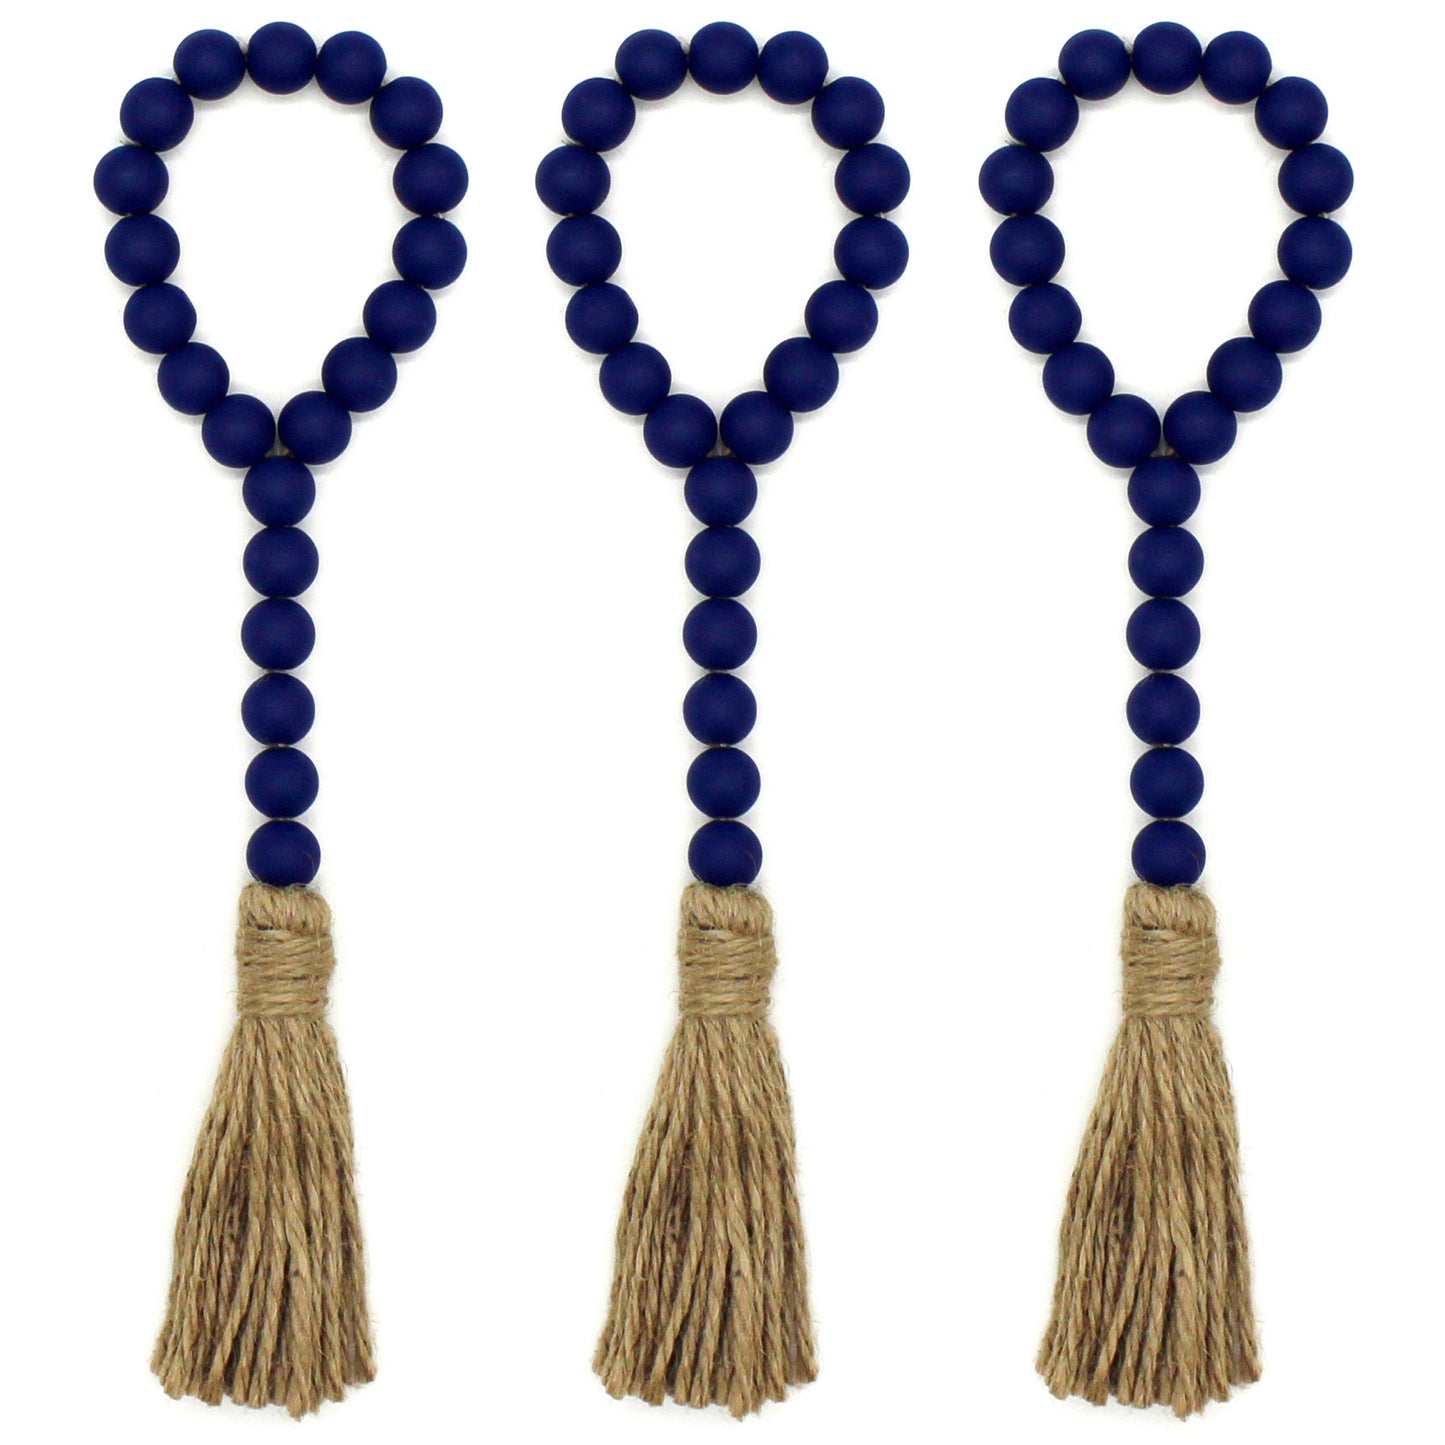 CVHOMEDECO. Wood Beads Garland with Tassels 3 PCS Farmhouse Rustic Wooden Prayer Bead String Wall Hanging Accent for Home Festival Decor. Navy Blue